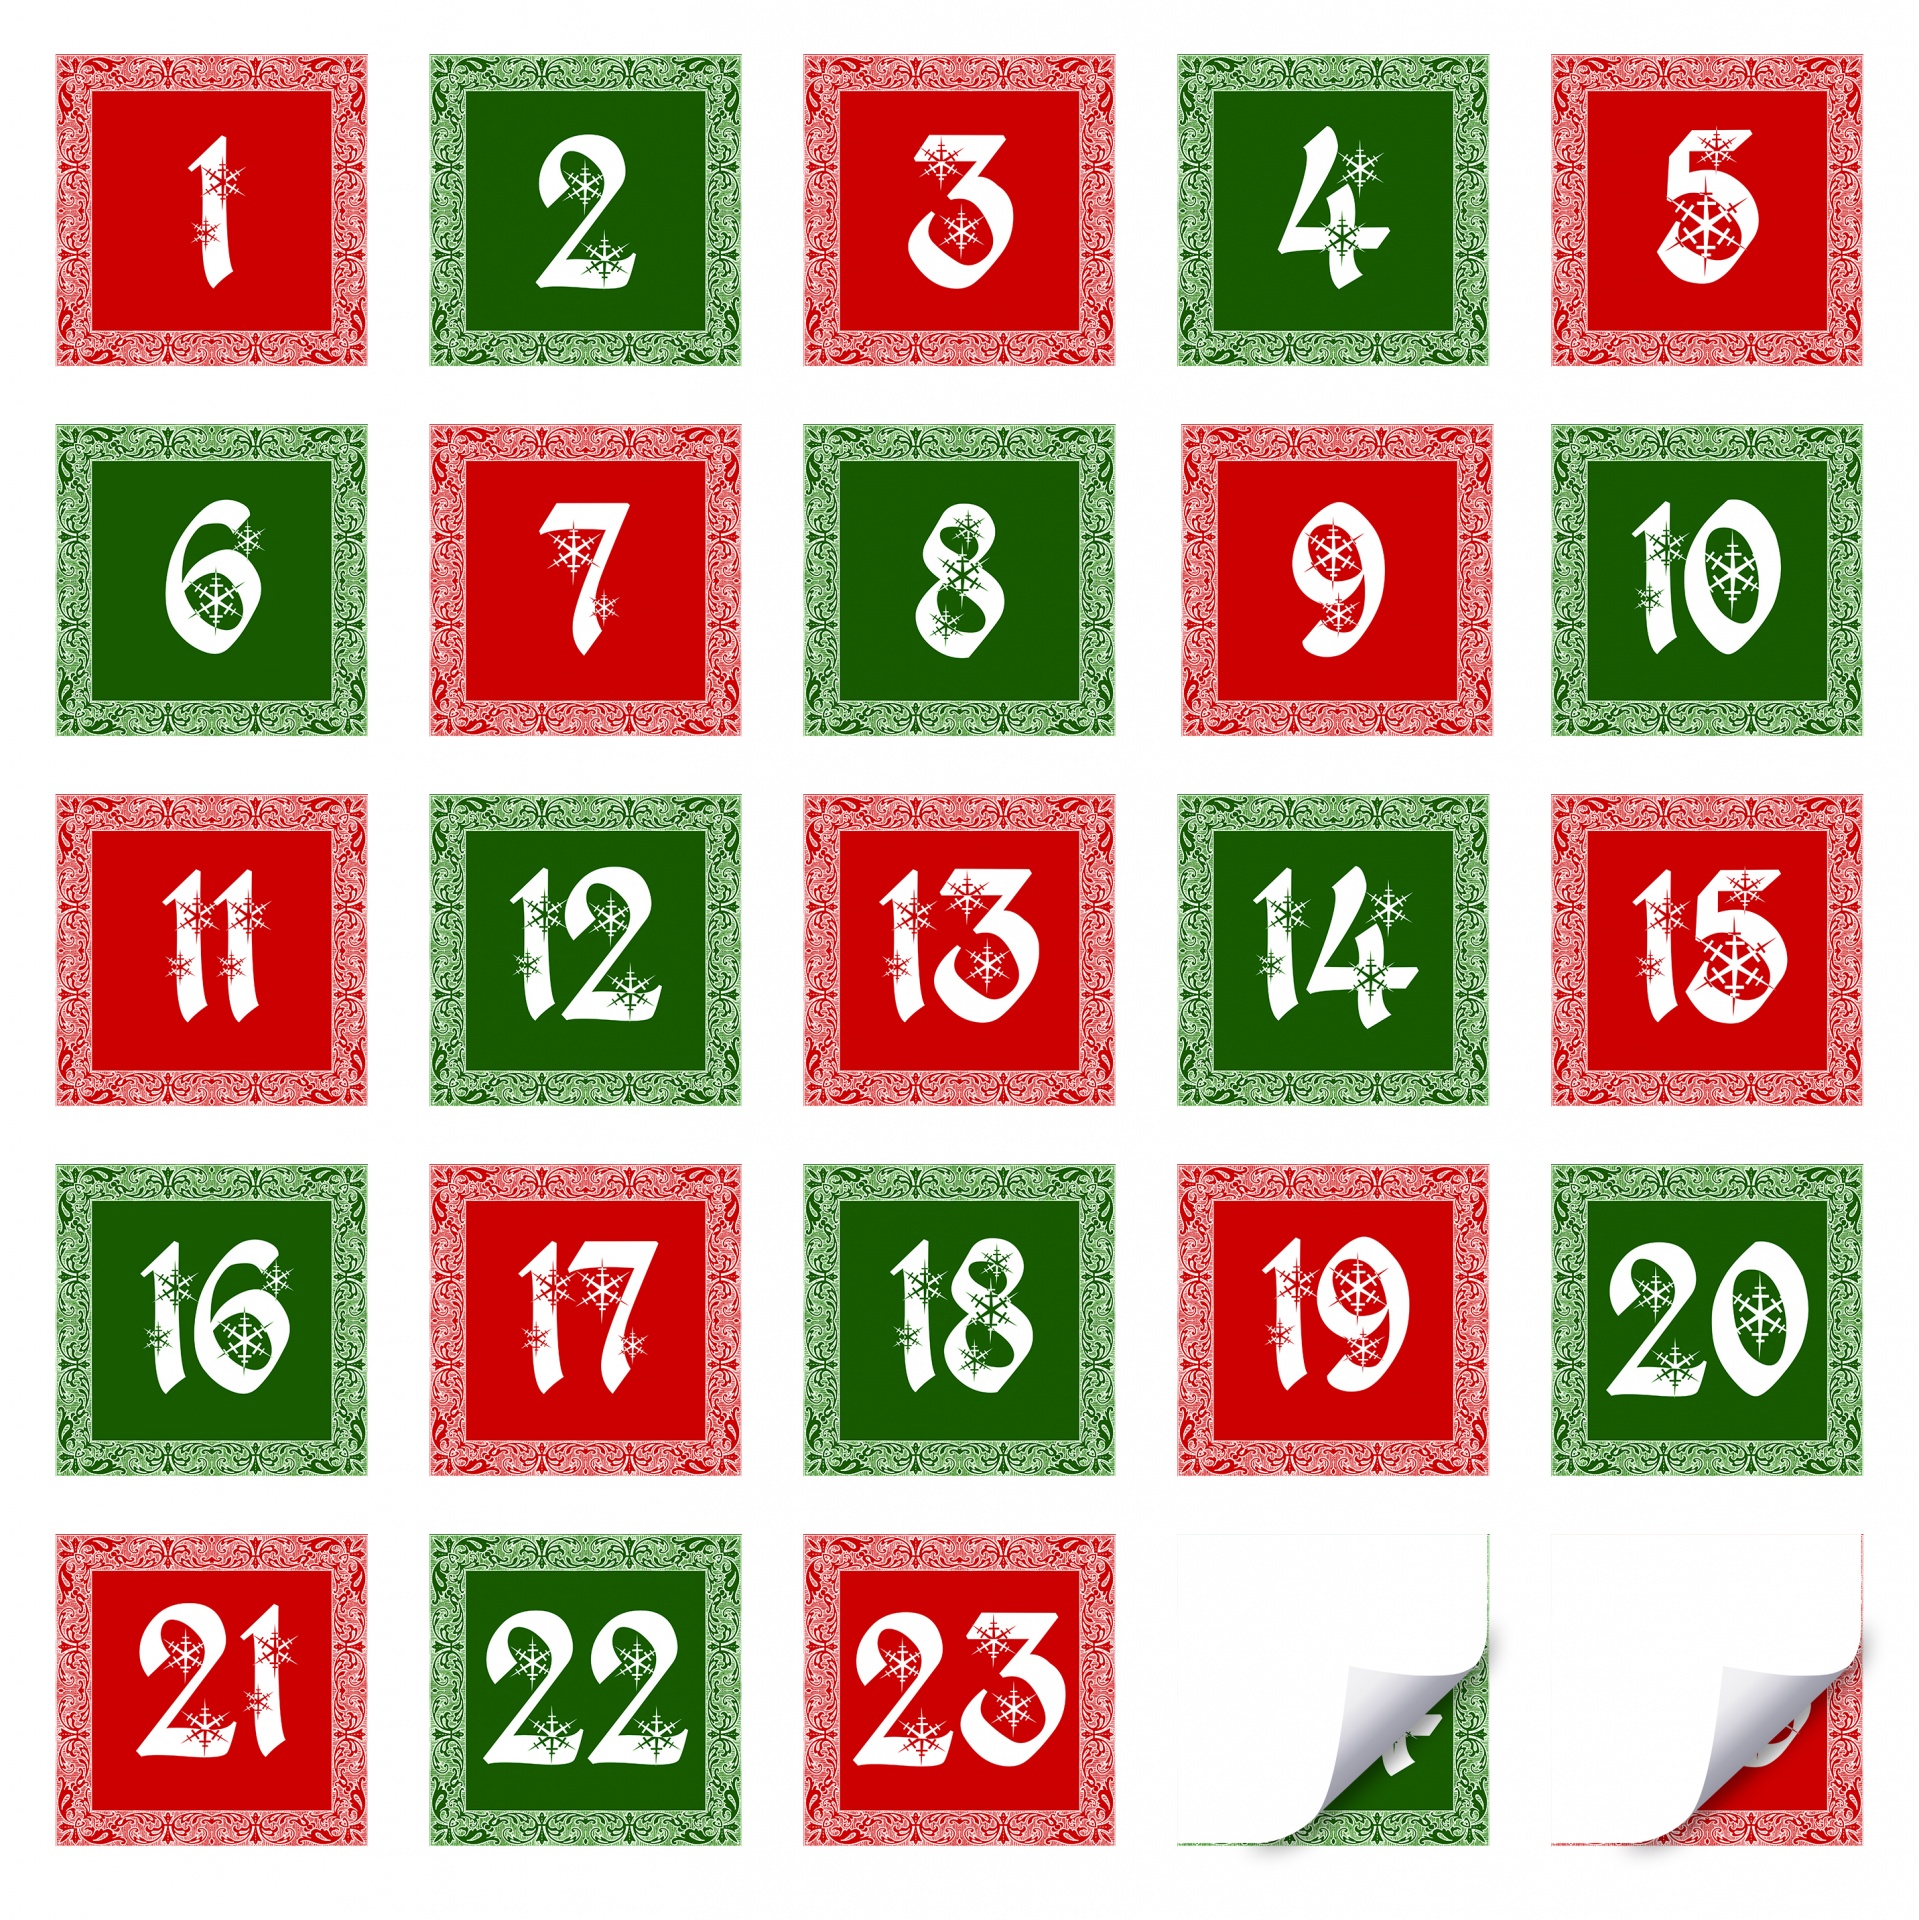 2 dimnensional craft ready advent calendar for holiday countdown to Christmas. see individual tiles in my profile.